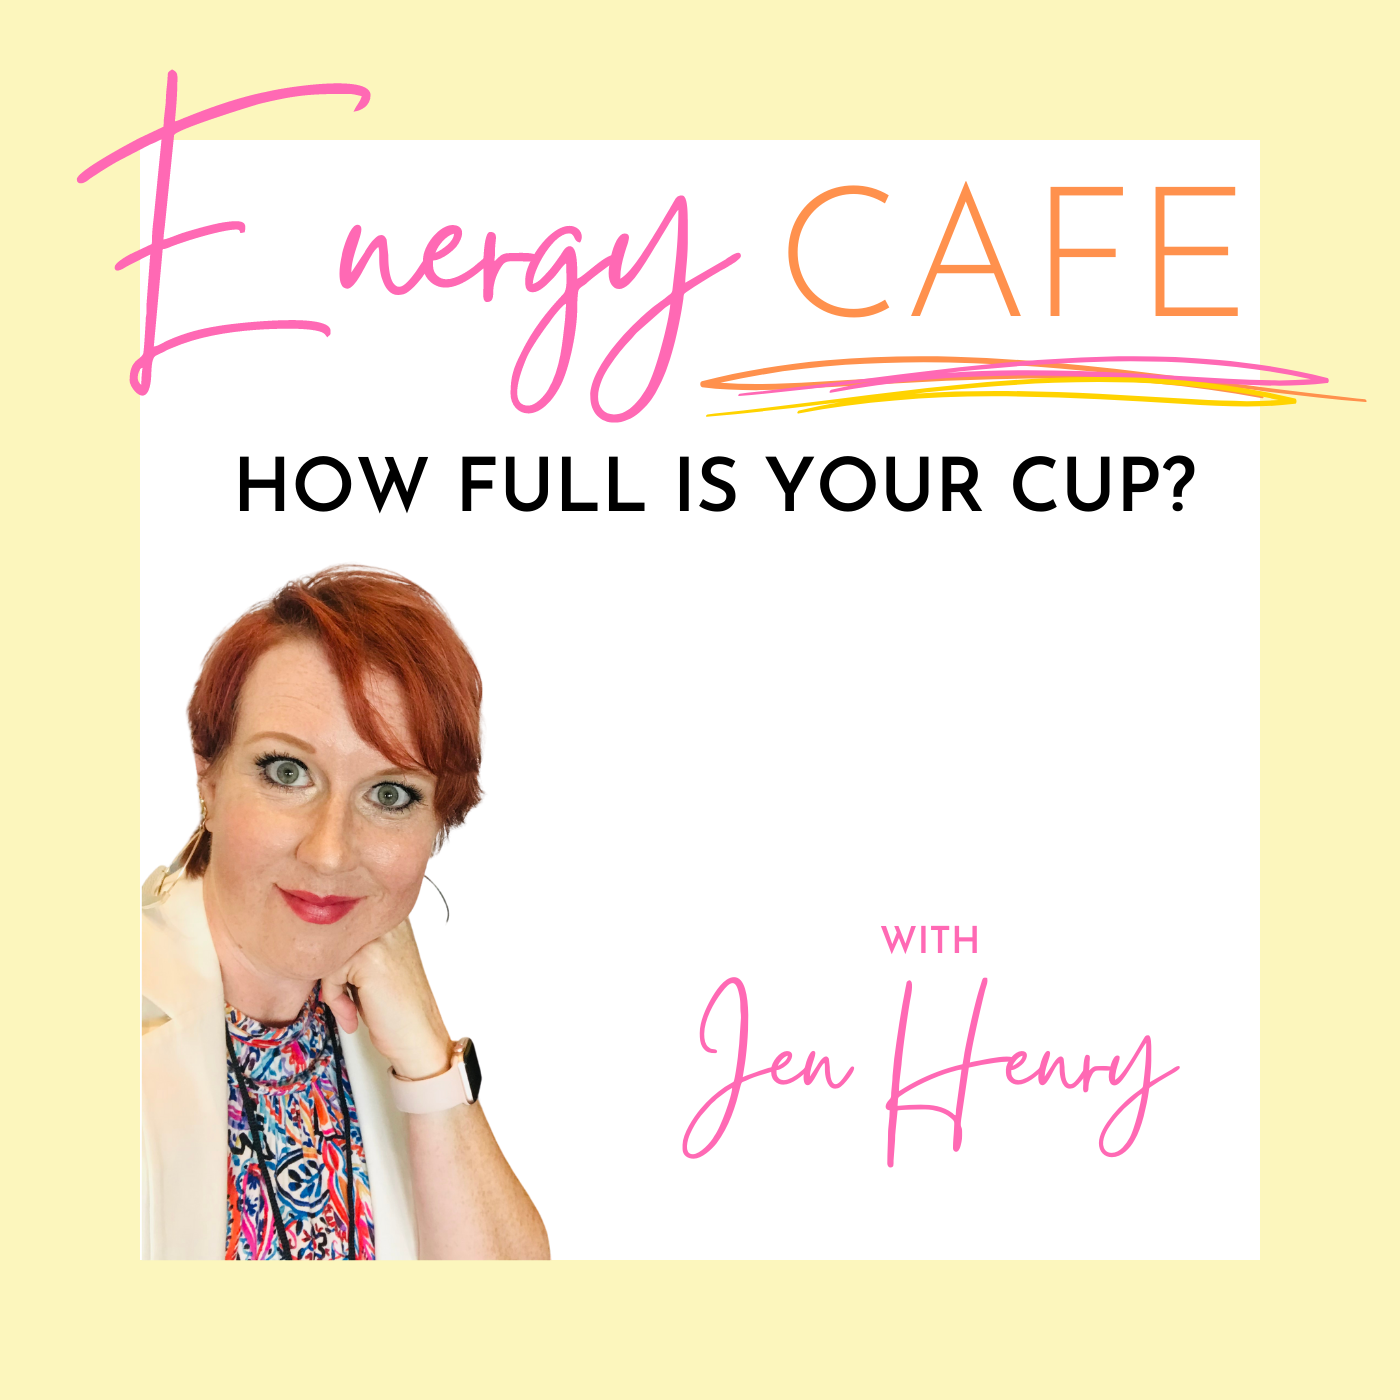 Artwork for The Energy Cafe